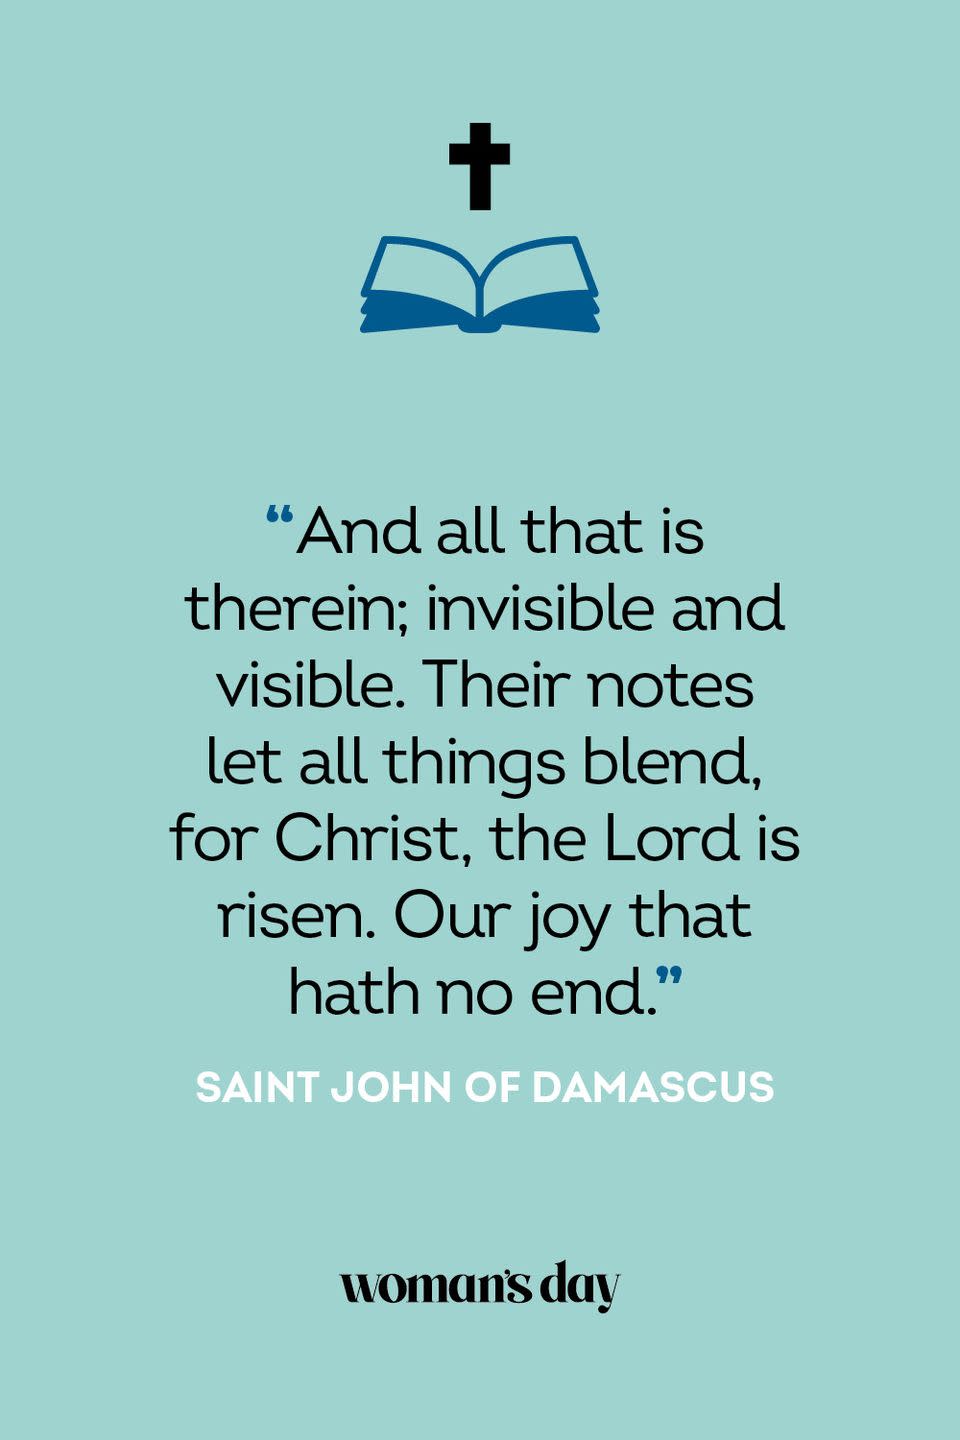 <p>“And all that is therein; invisible and visible. Their notes let all things blend, for Christ, the Lord is risen. Our joy that hath no end.” — Saint John of Damascus</p>